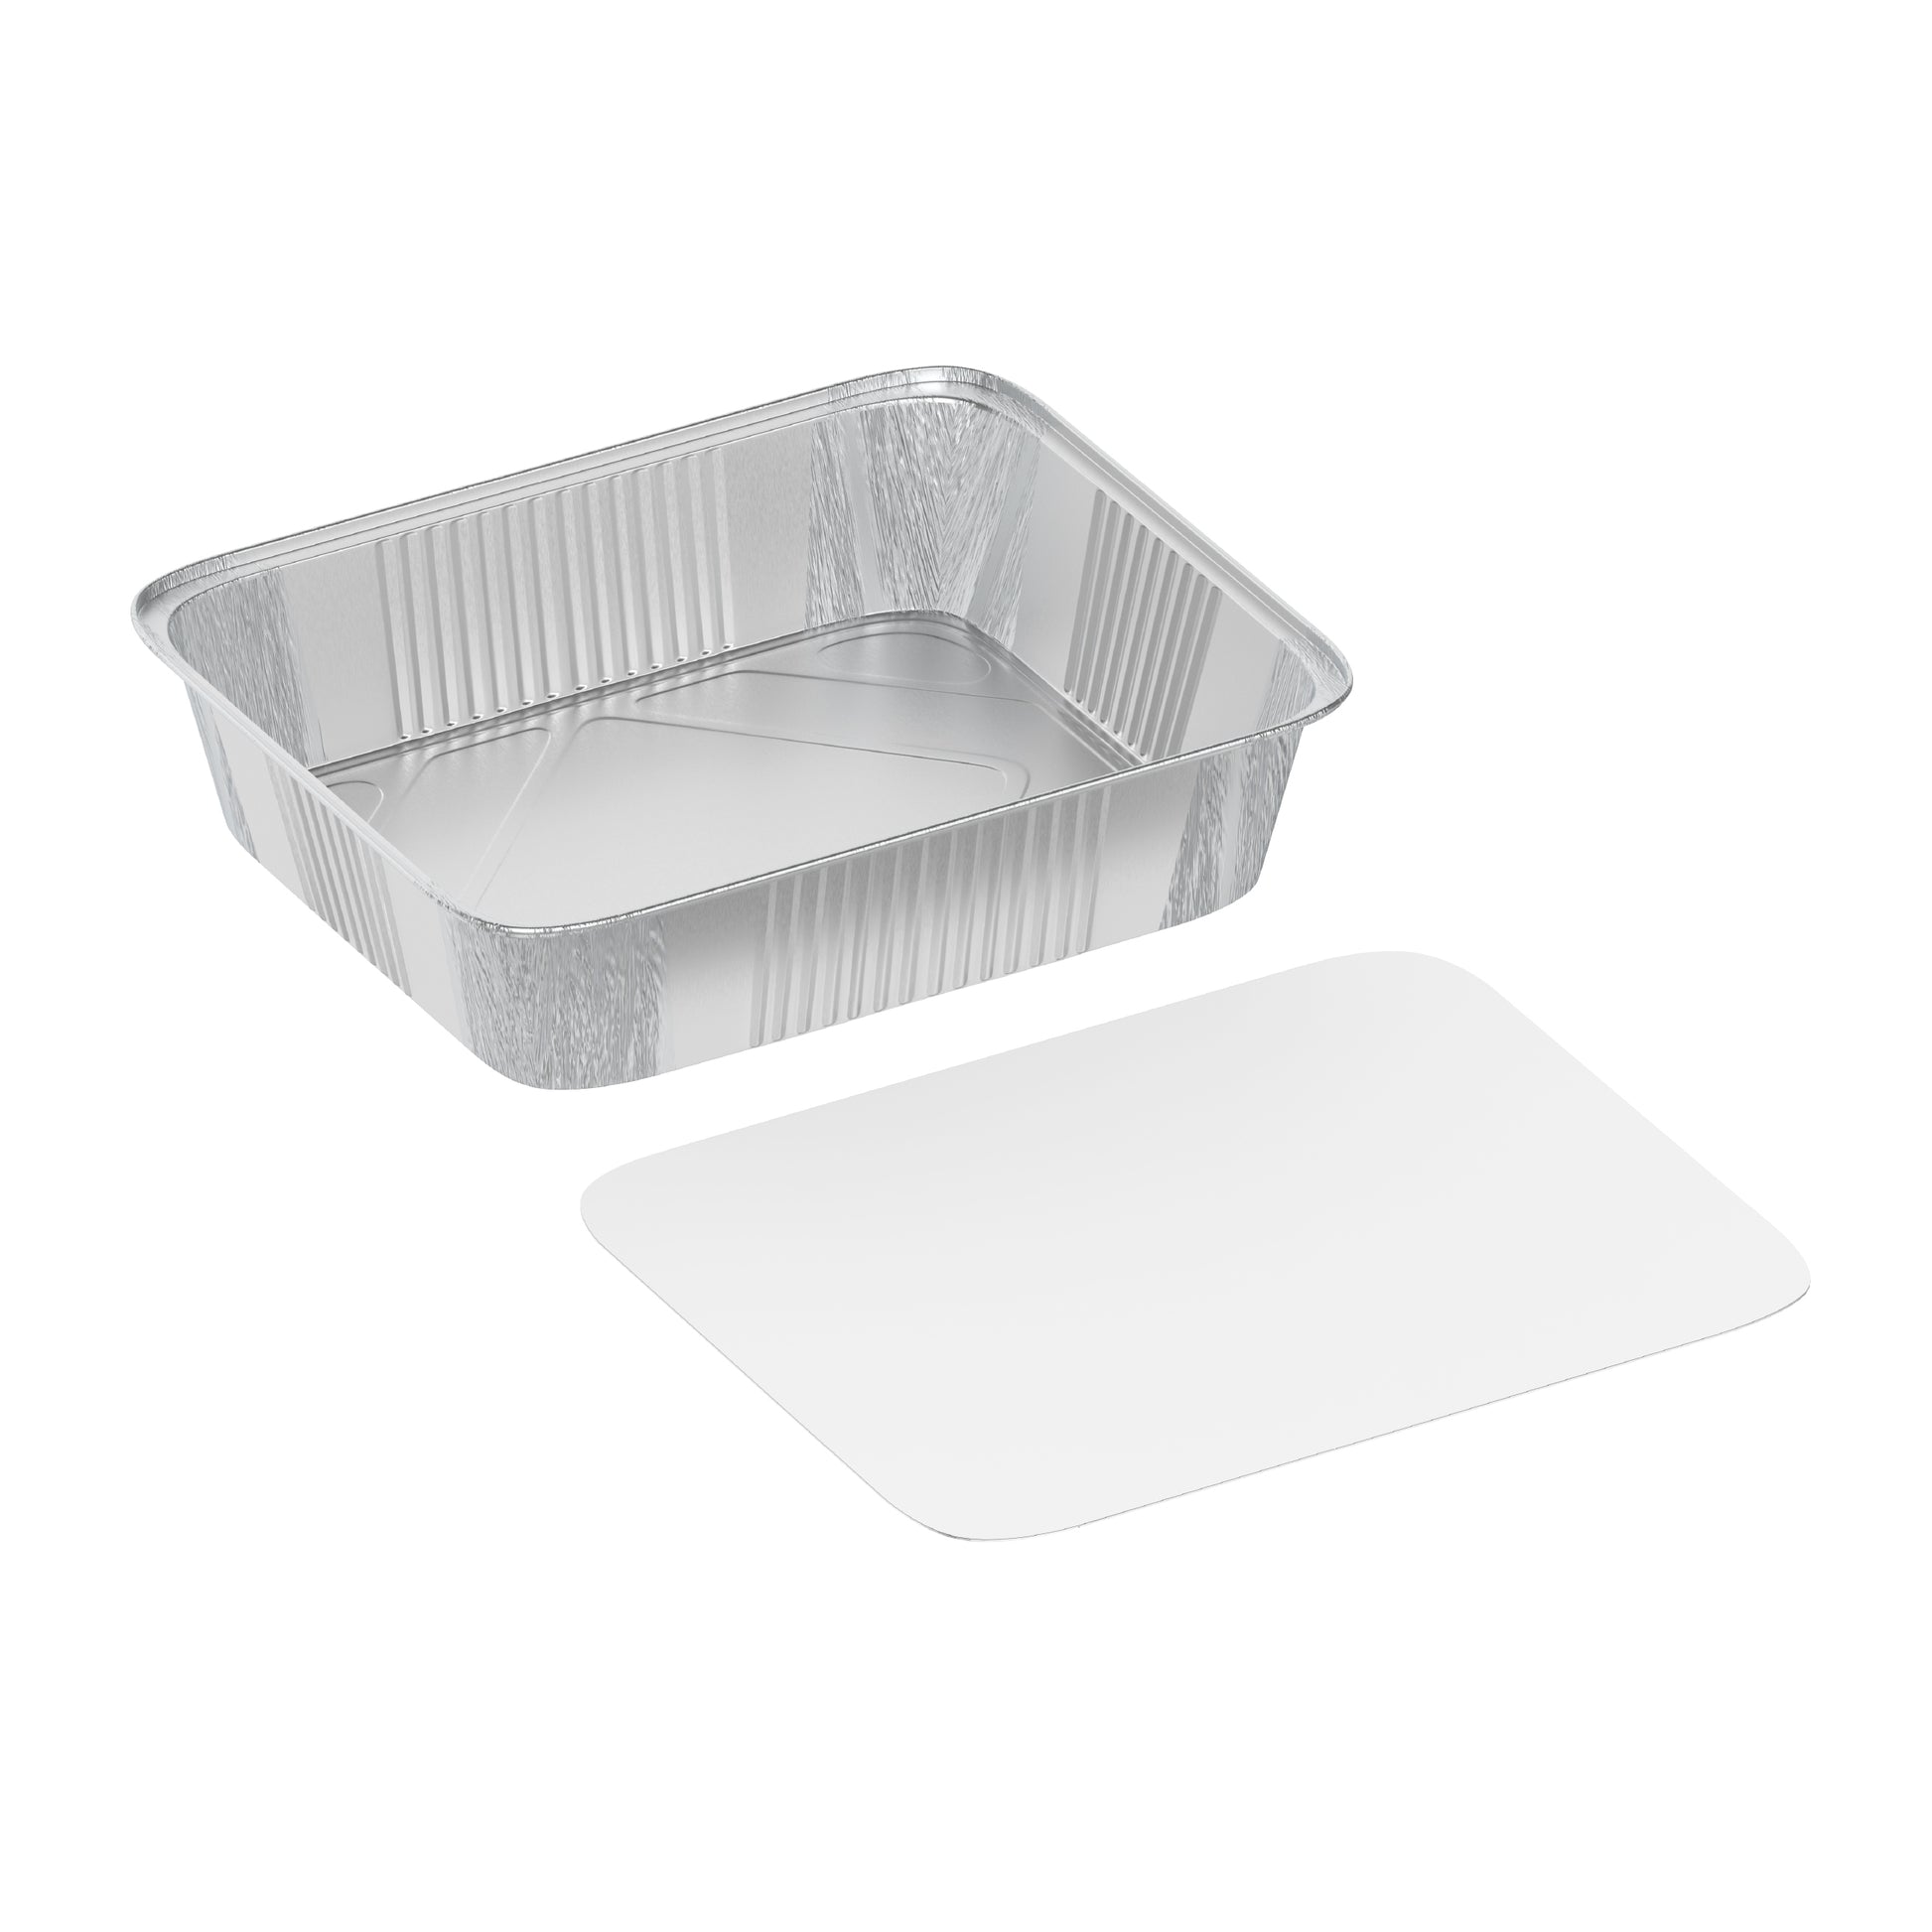 3650 cc Pack of 10 Aluminium Containers with Lids